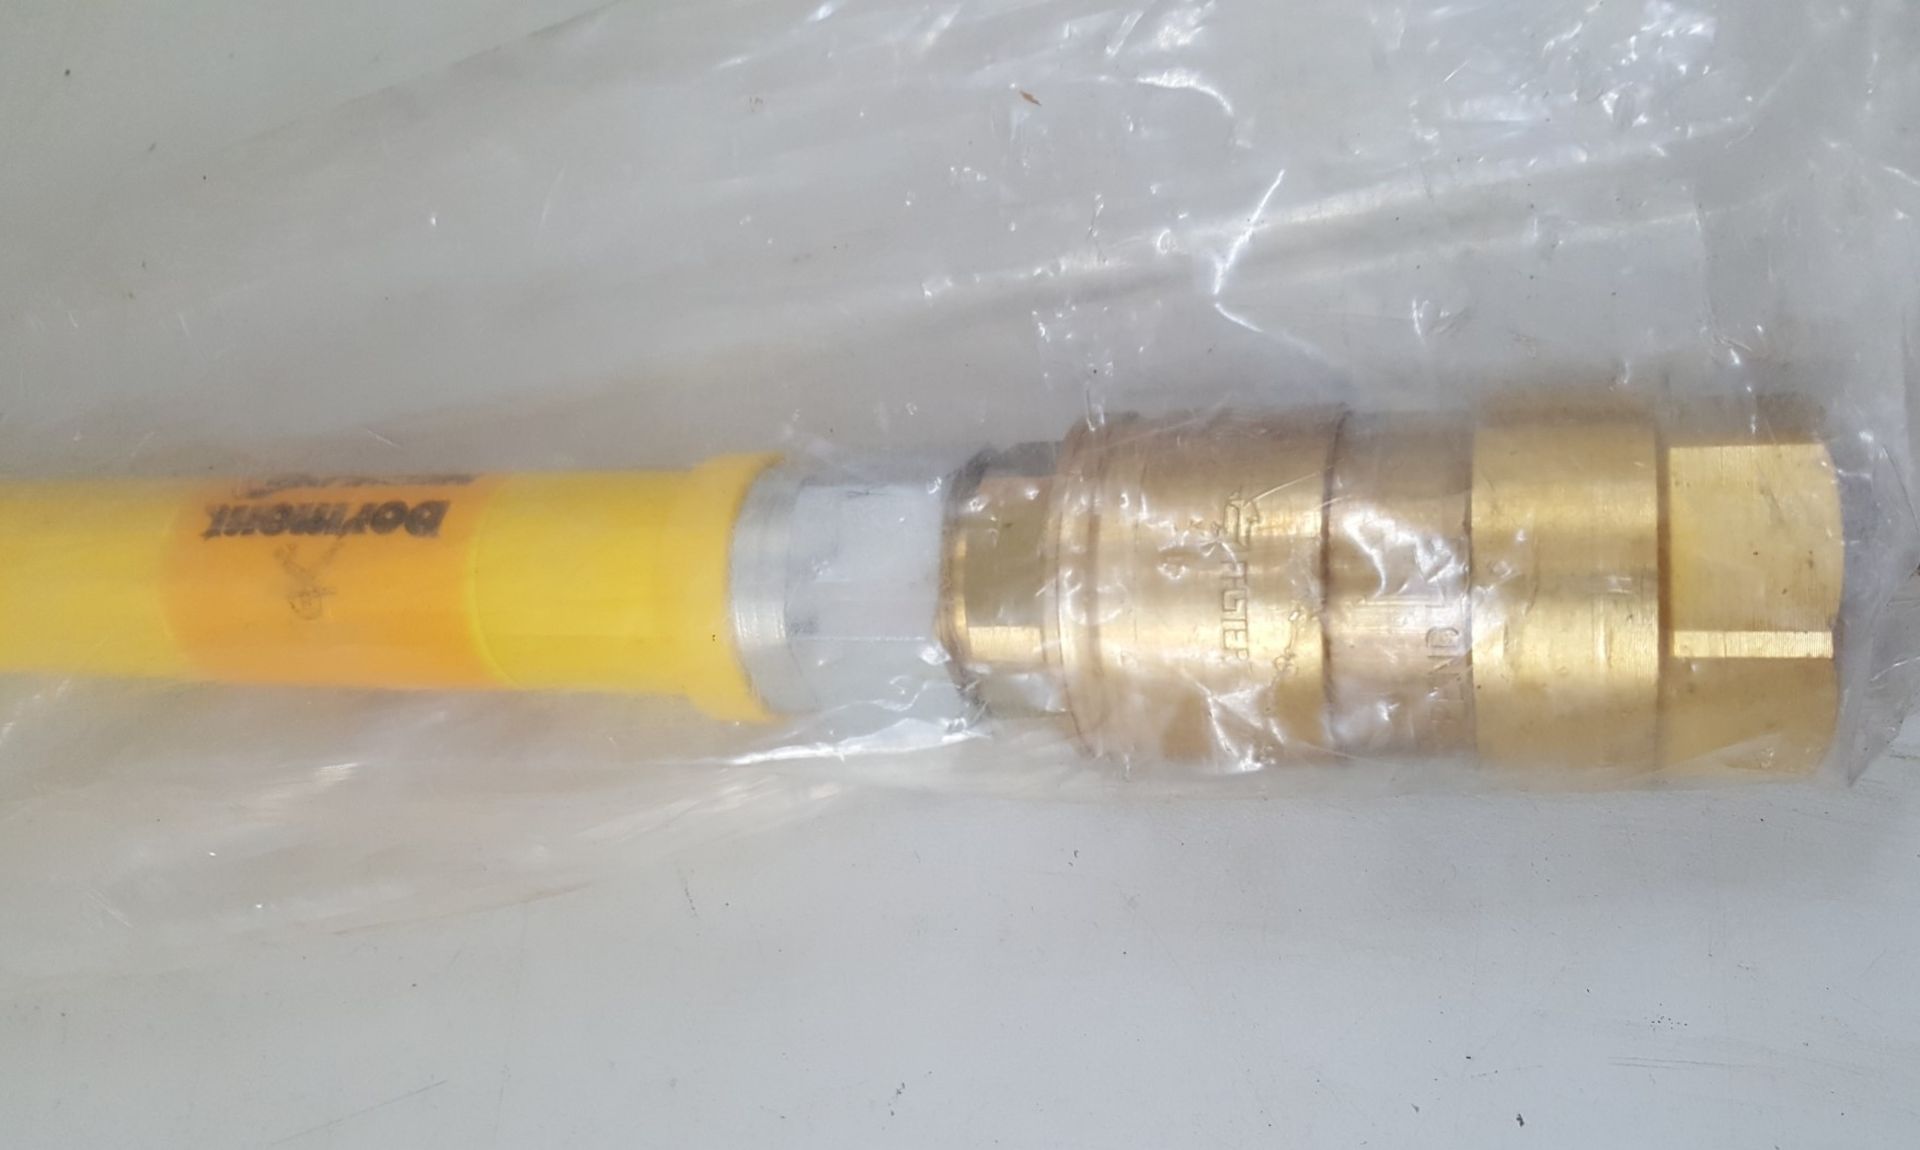 1 x NEW DORMONT BY MECHLINE 3/4 INCH YELLOW CATERING GAS HOSE 1M - Ref BY206 - Image 4 of 4